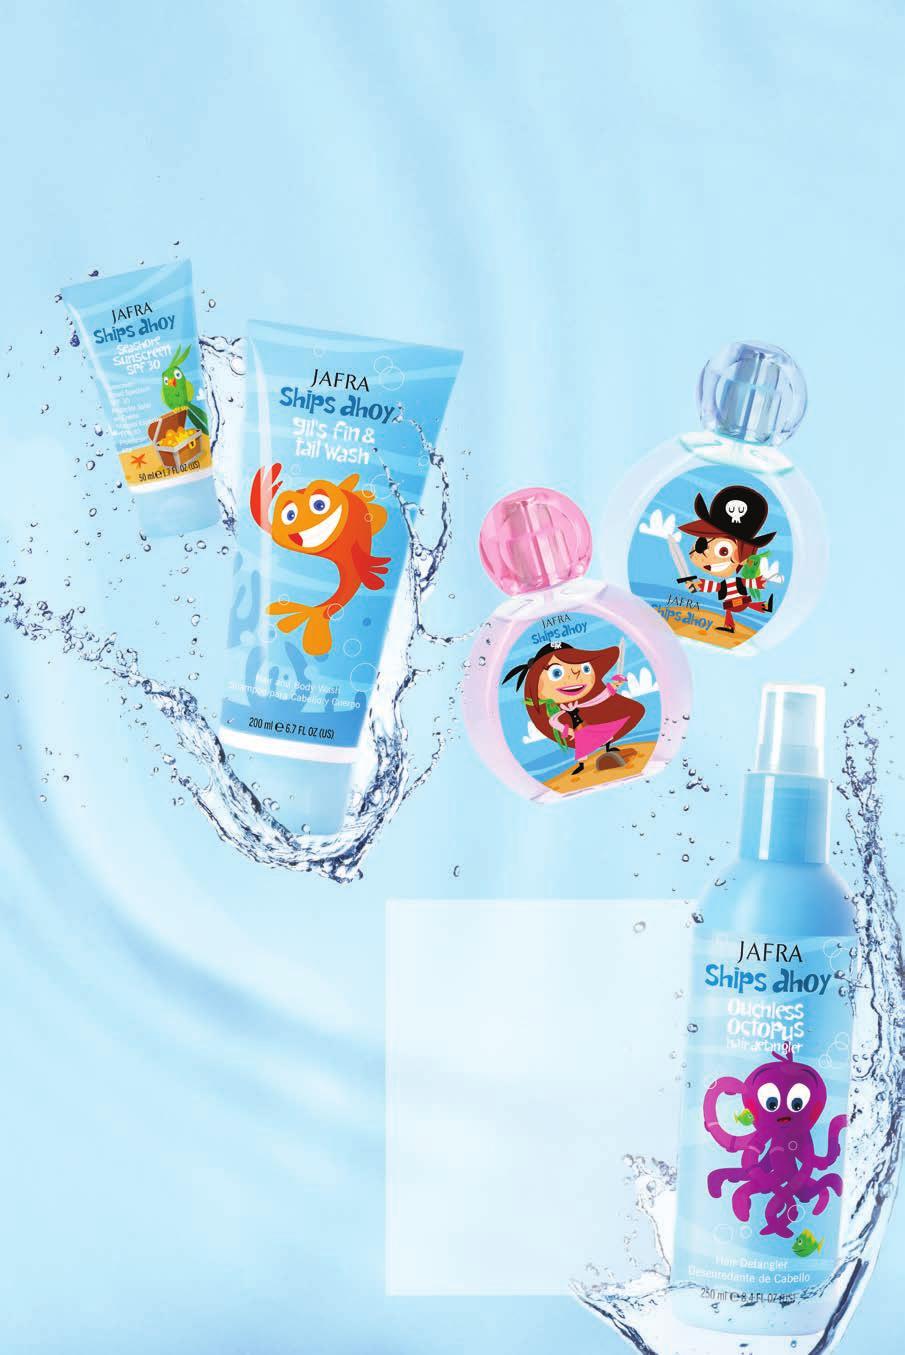 Encourage adventure Bath time just got fun and